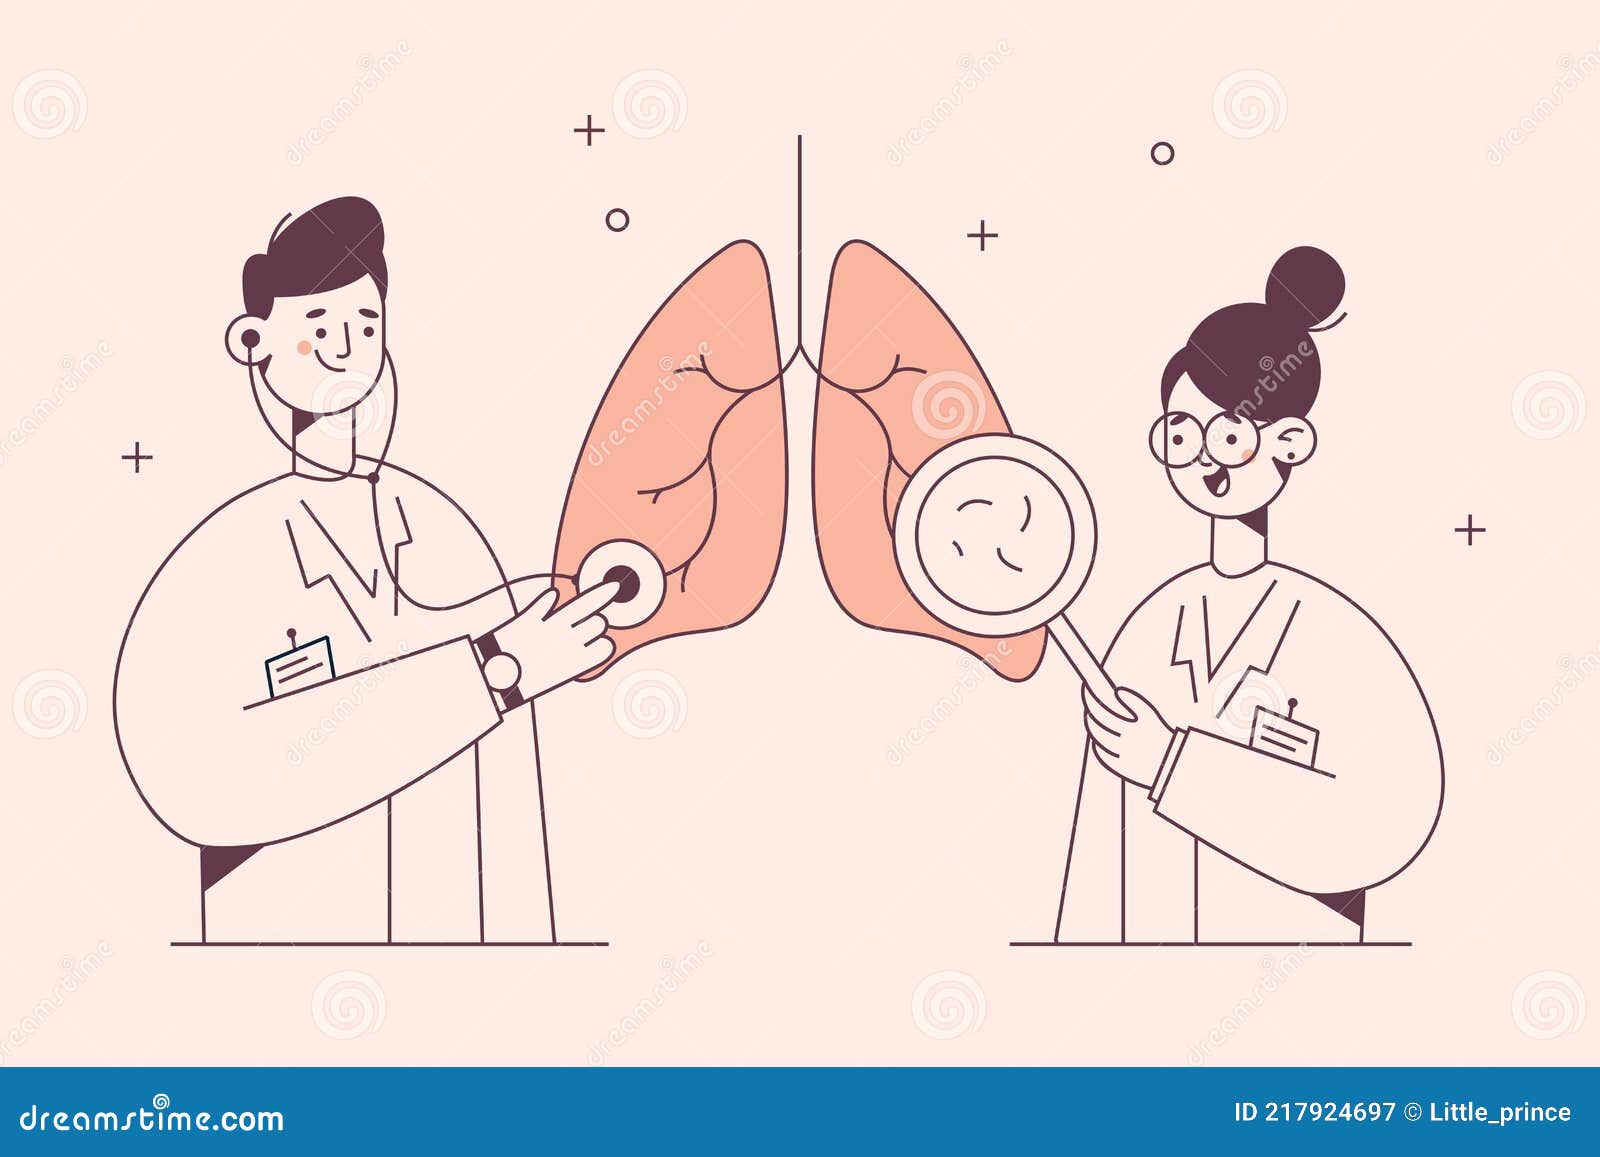 lungs examination in medicine, pulmonology concept